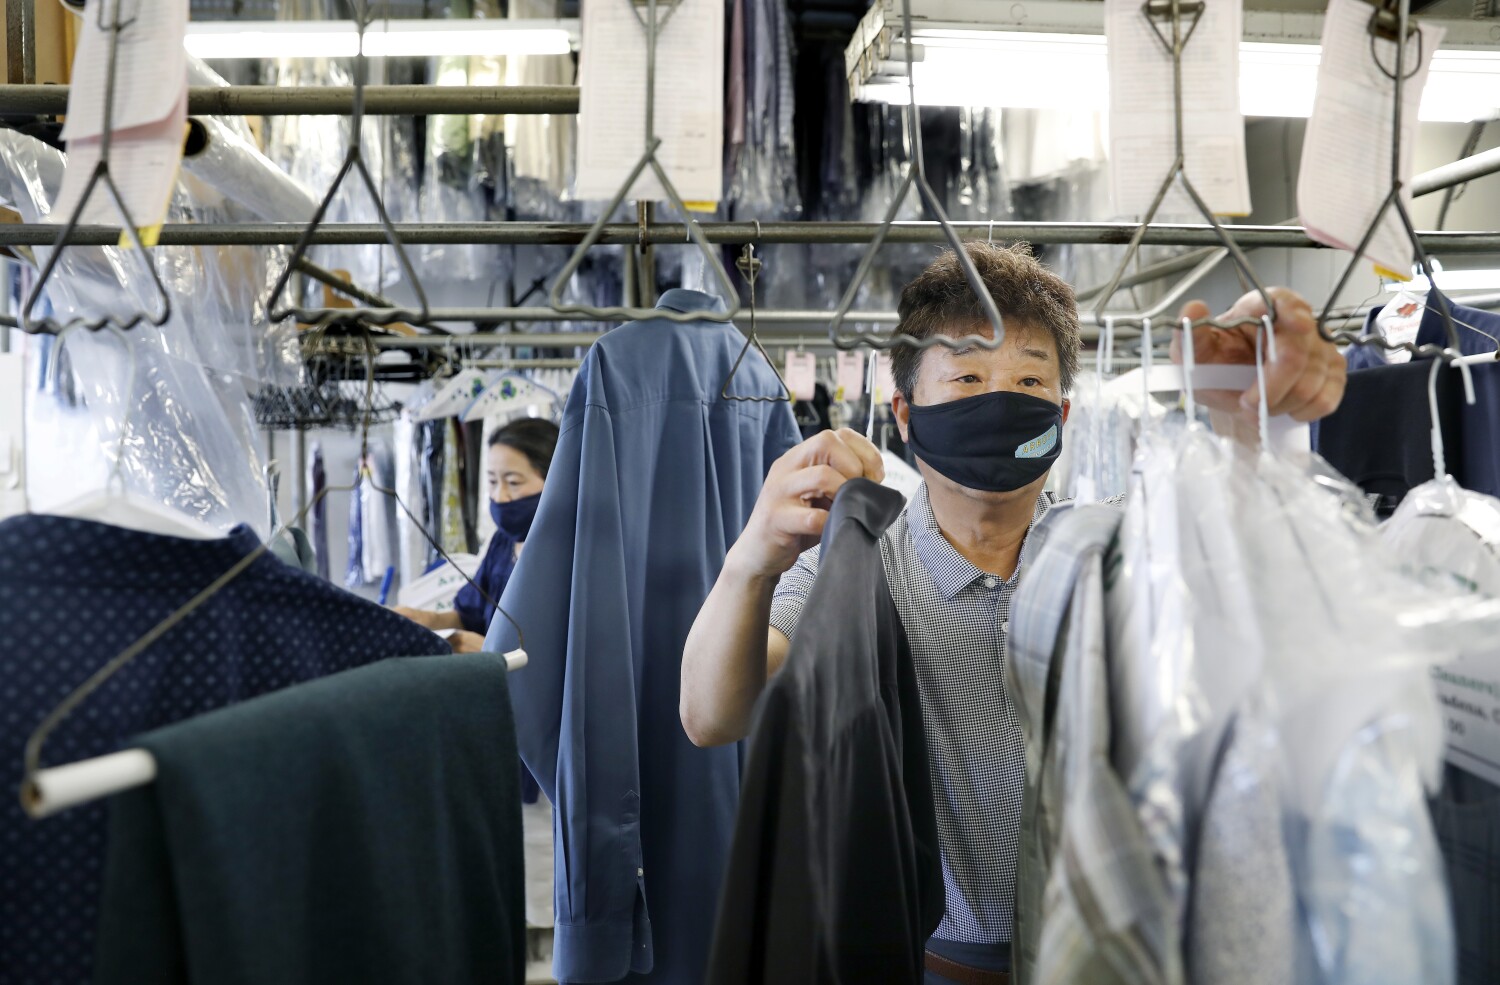 Podcast: The rise and fall of Korean dry cleaners